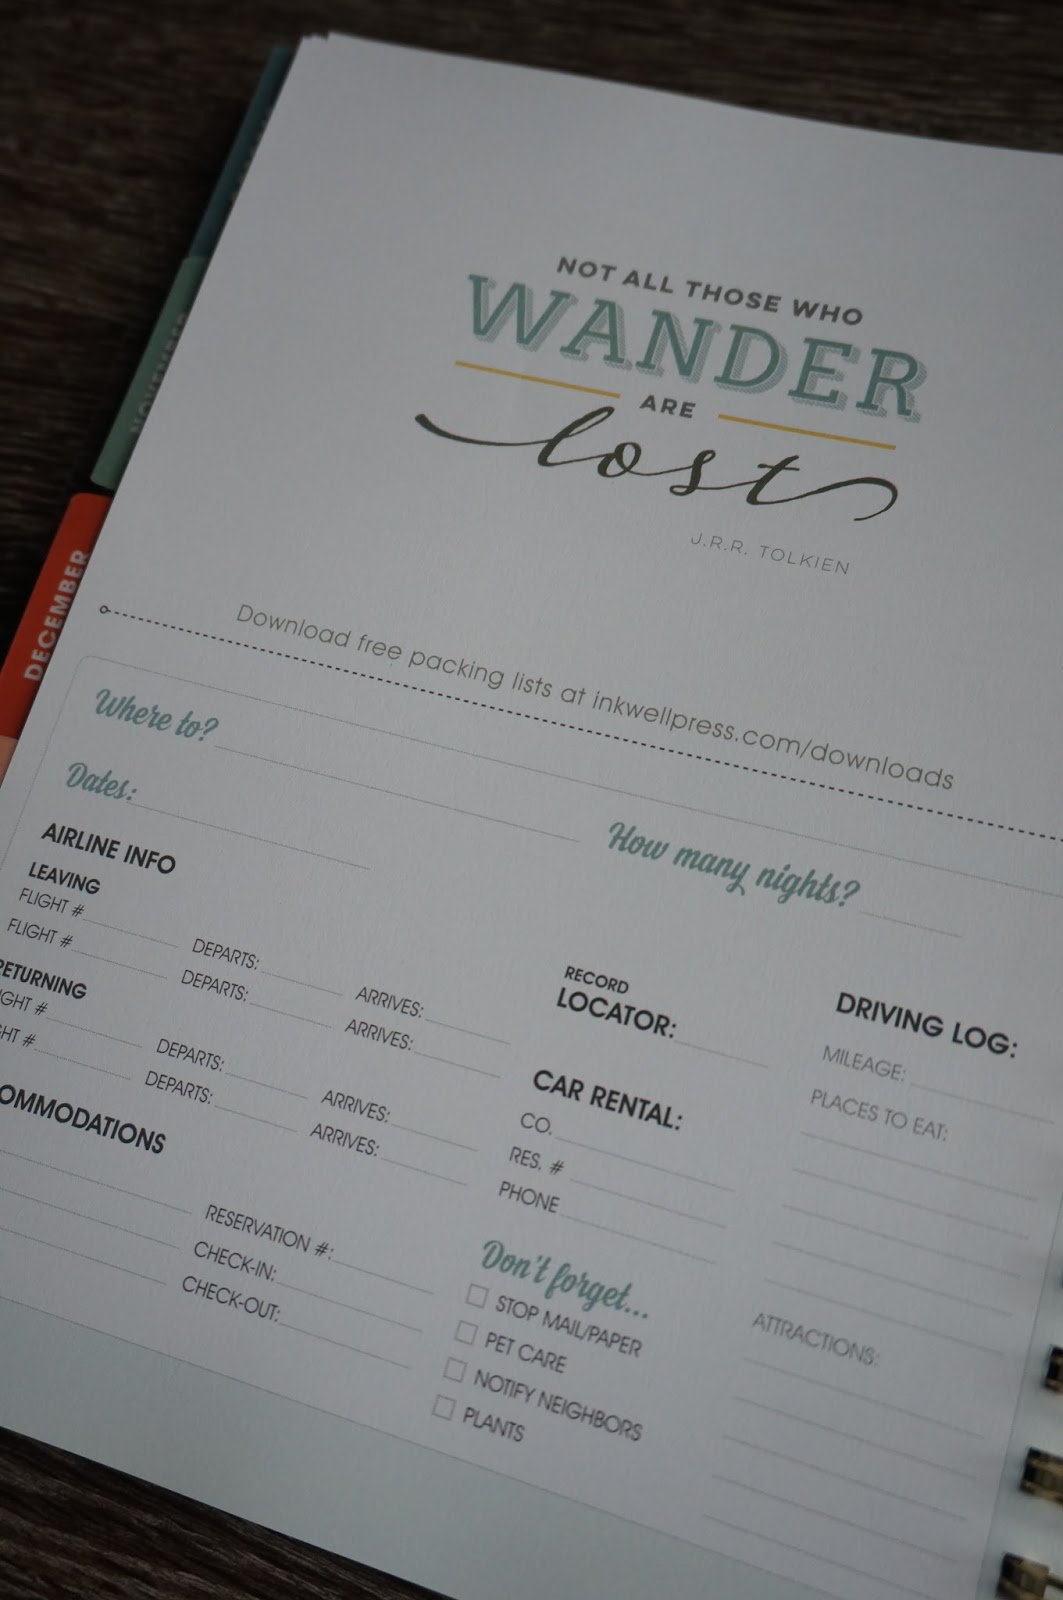 2017 Inkwell Press Planner by North Carolina style blogger Rebecca Lately